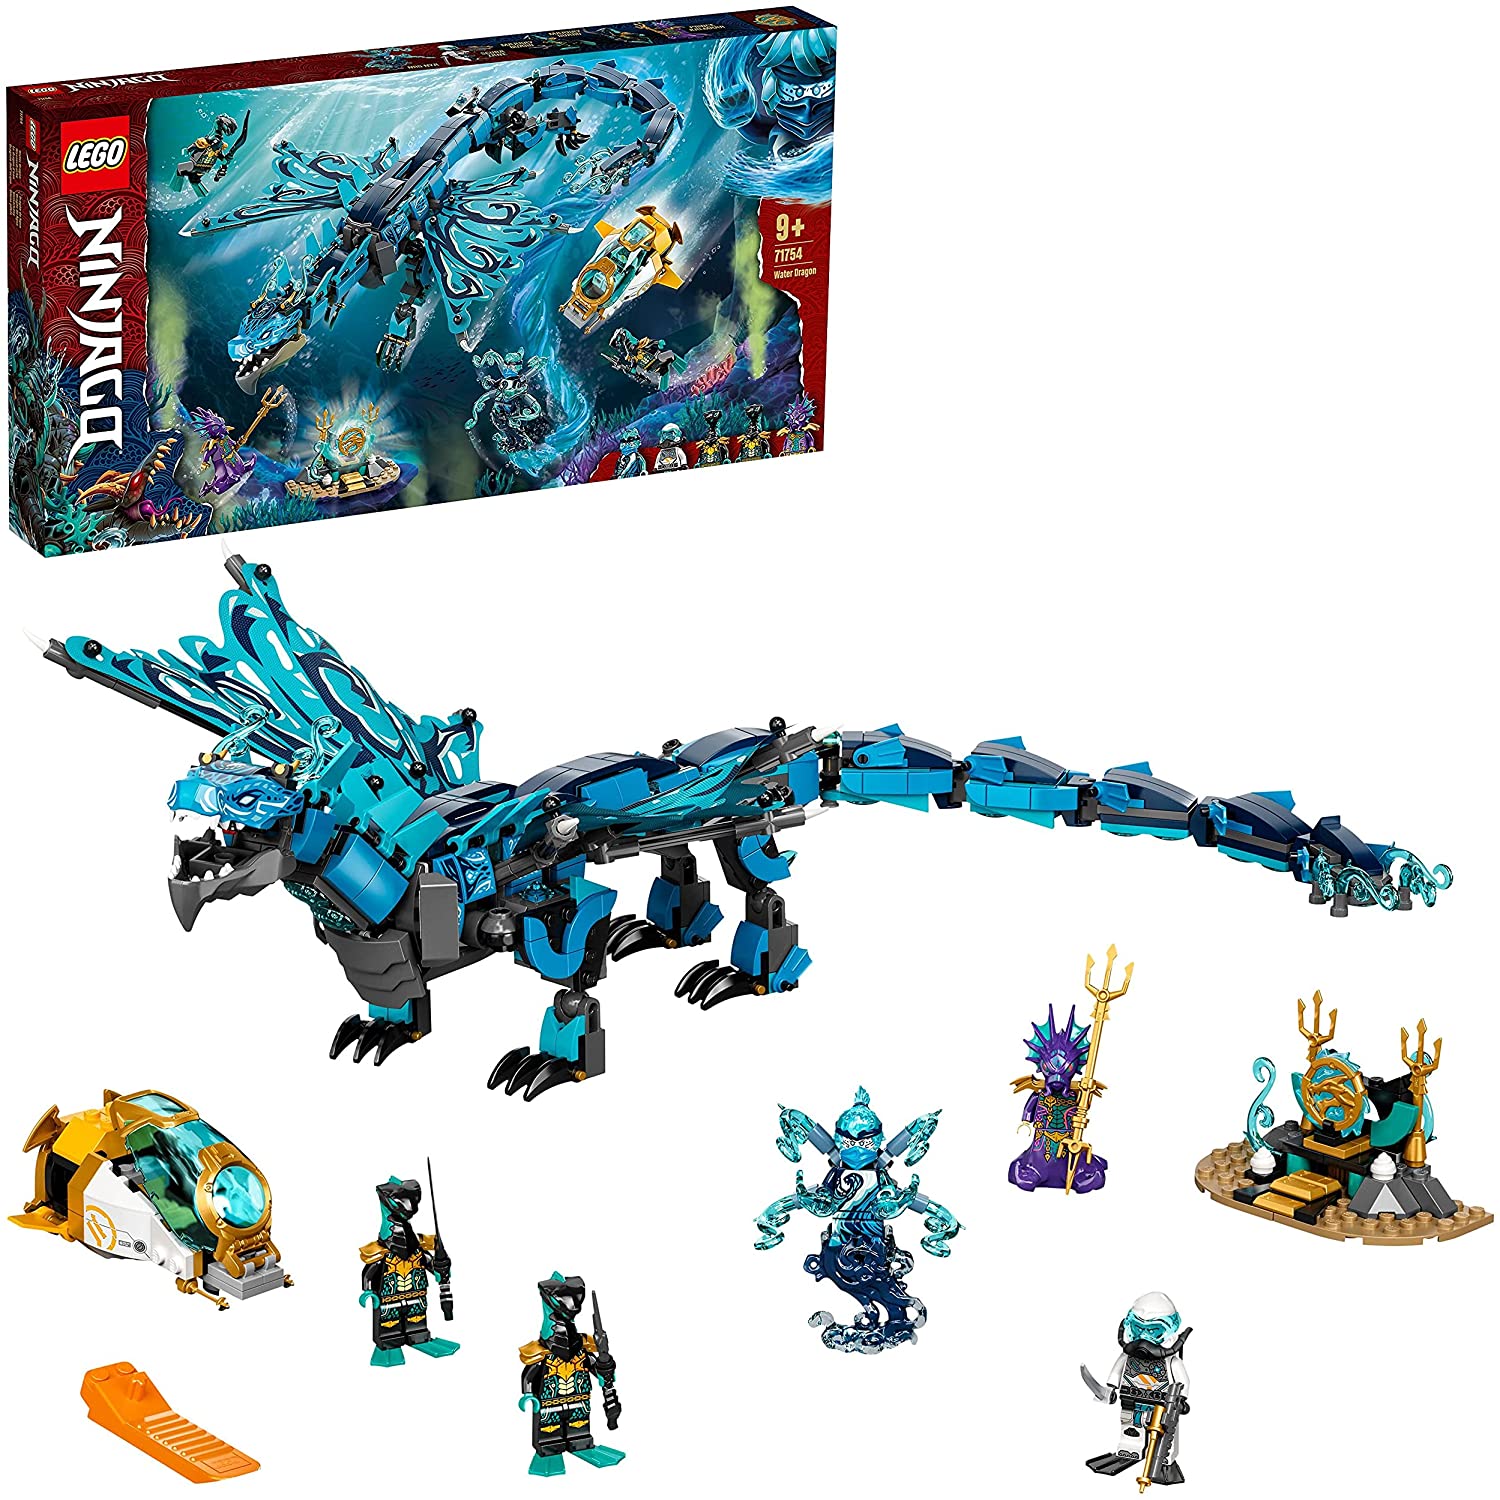 LEGO 71754 Ninjago Water Dragon Toy for Children from 9 Years, Set of 5 Nin